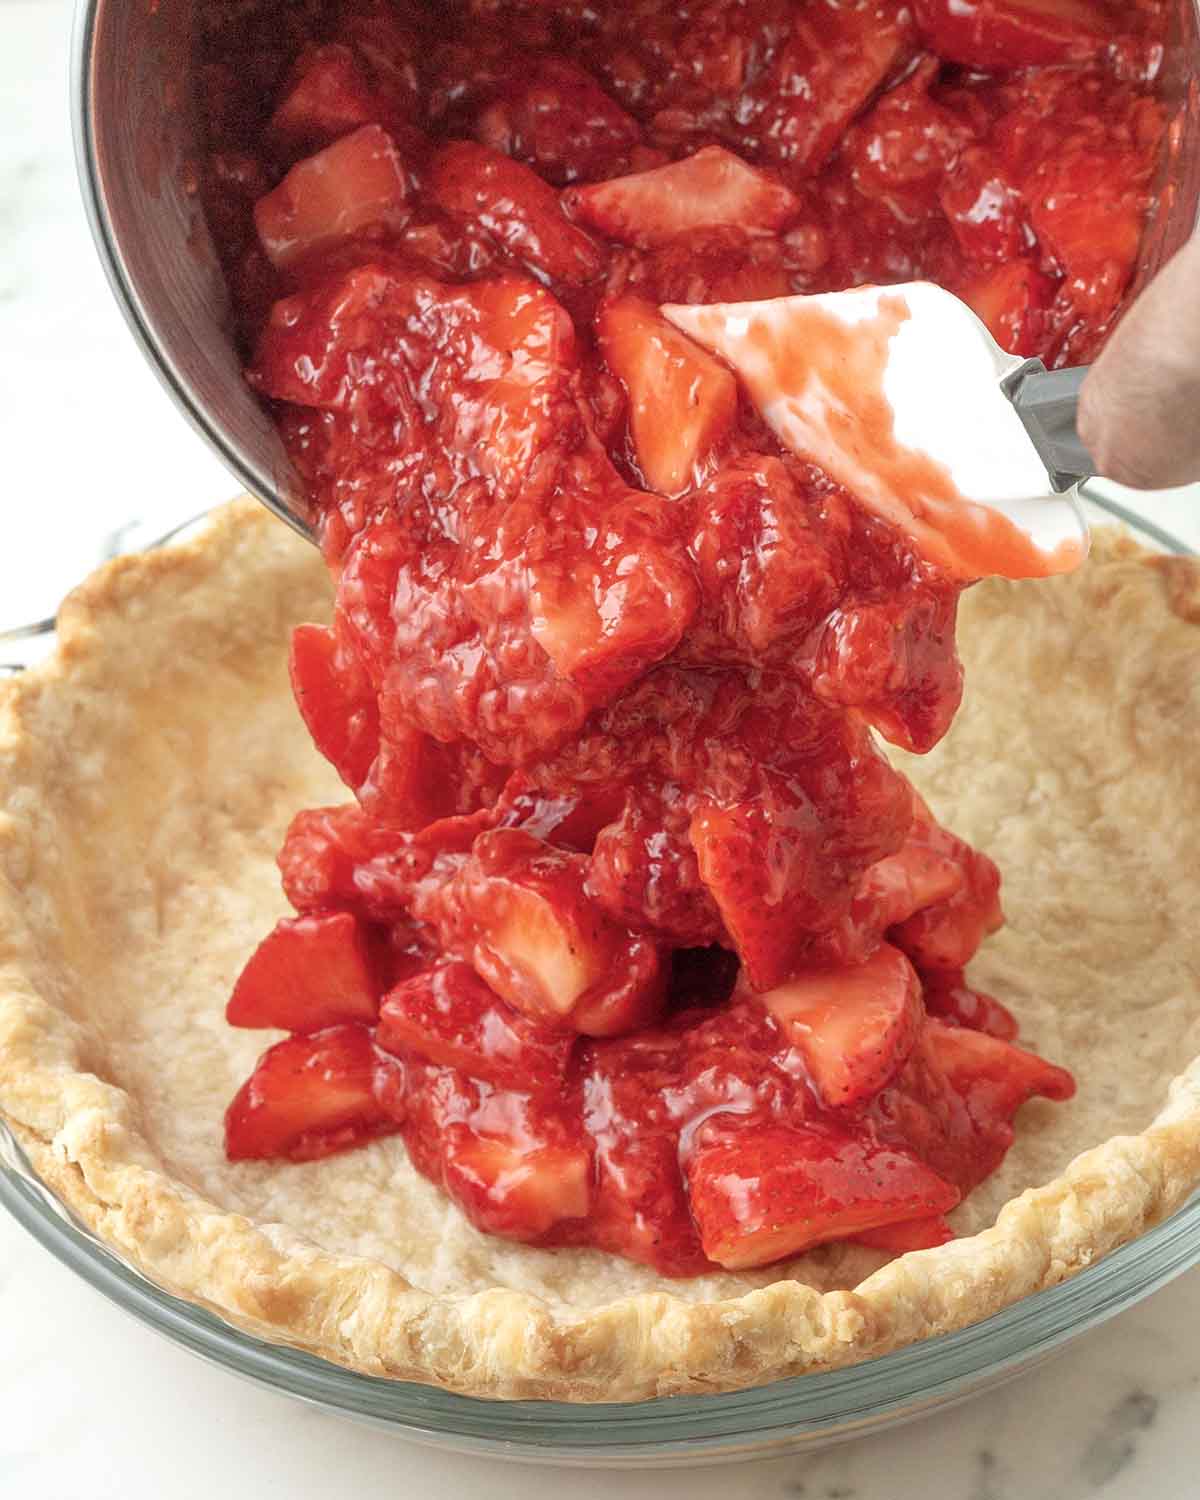 Vegan strawberry pie filling being poured into a pie crust.